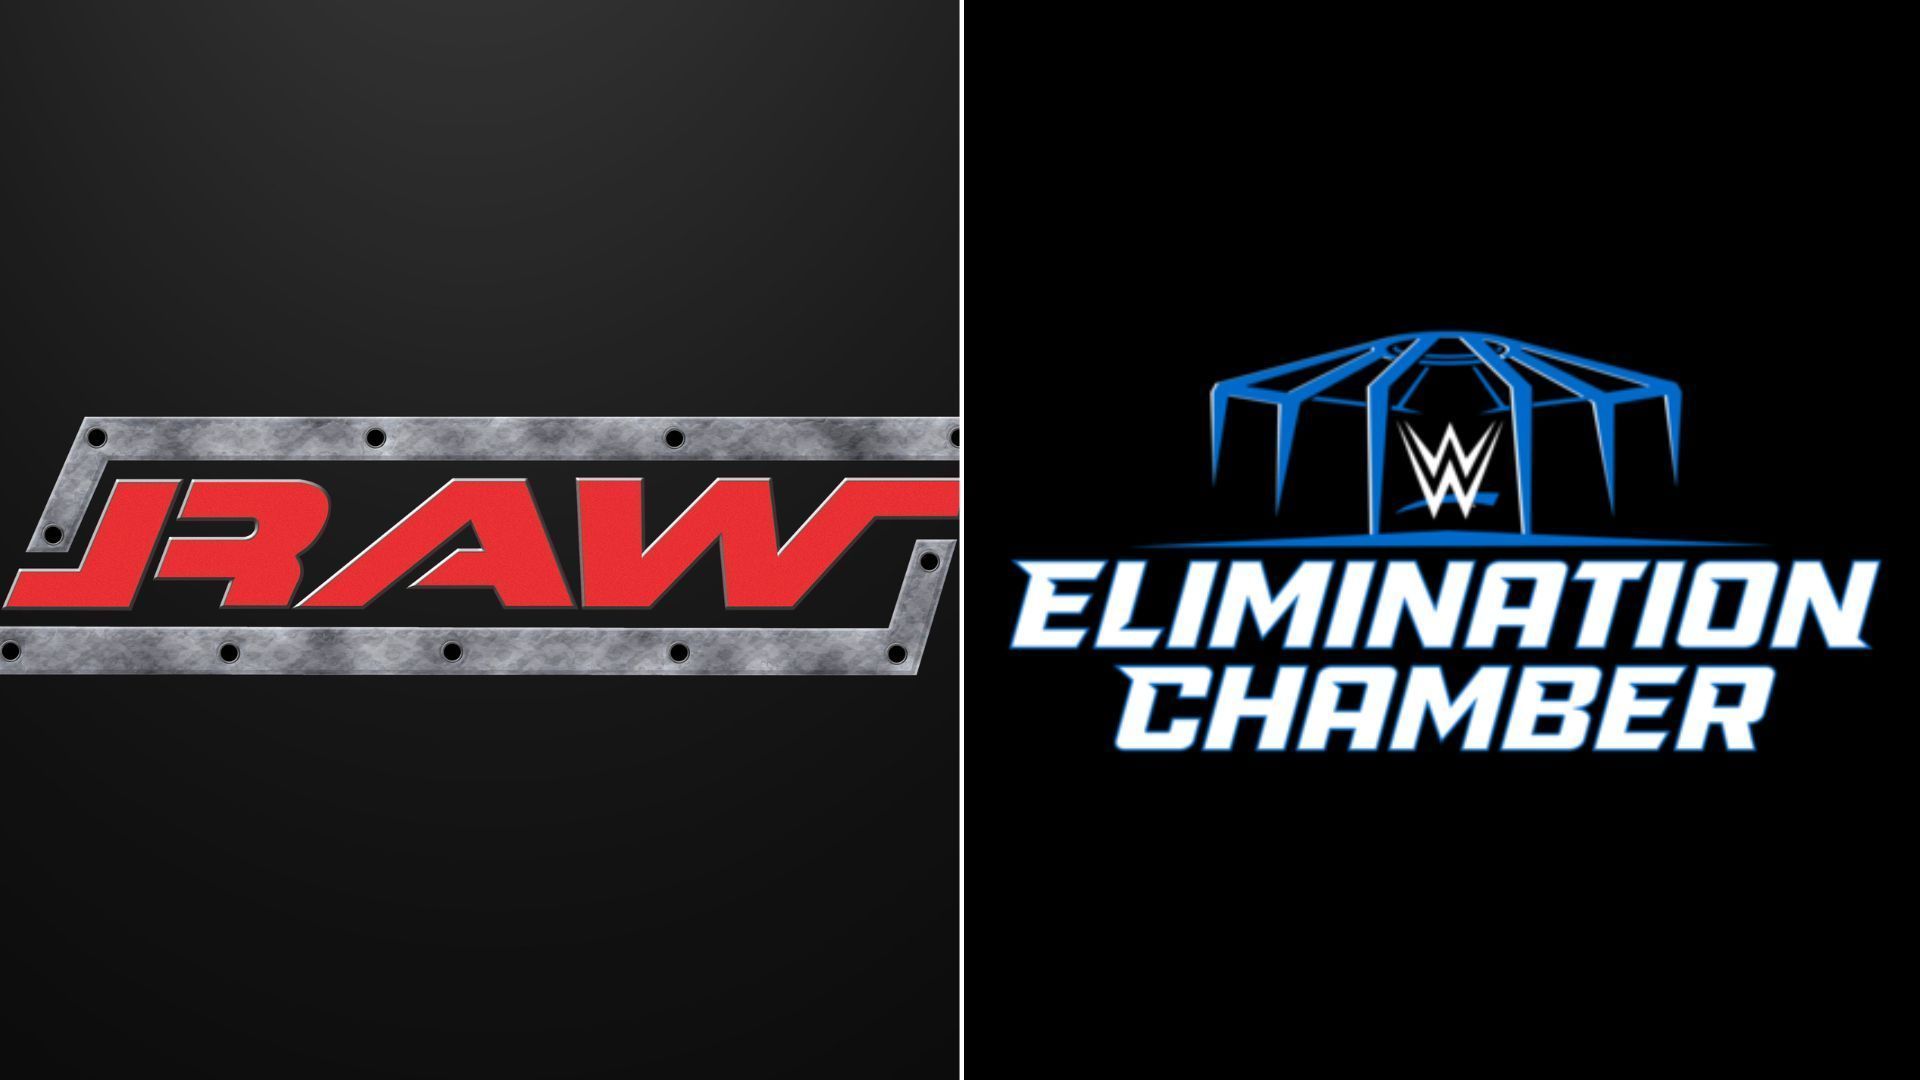 There will be two Elimination Chamber matches for WWE RAW!